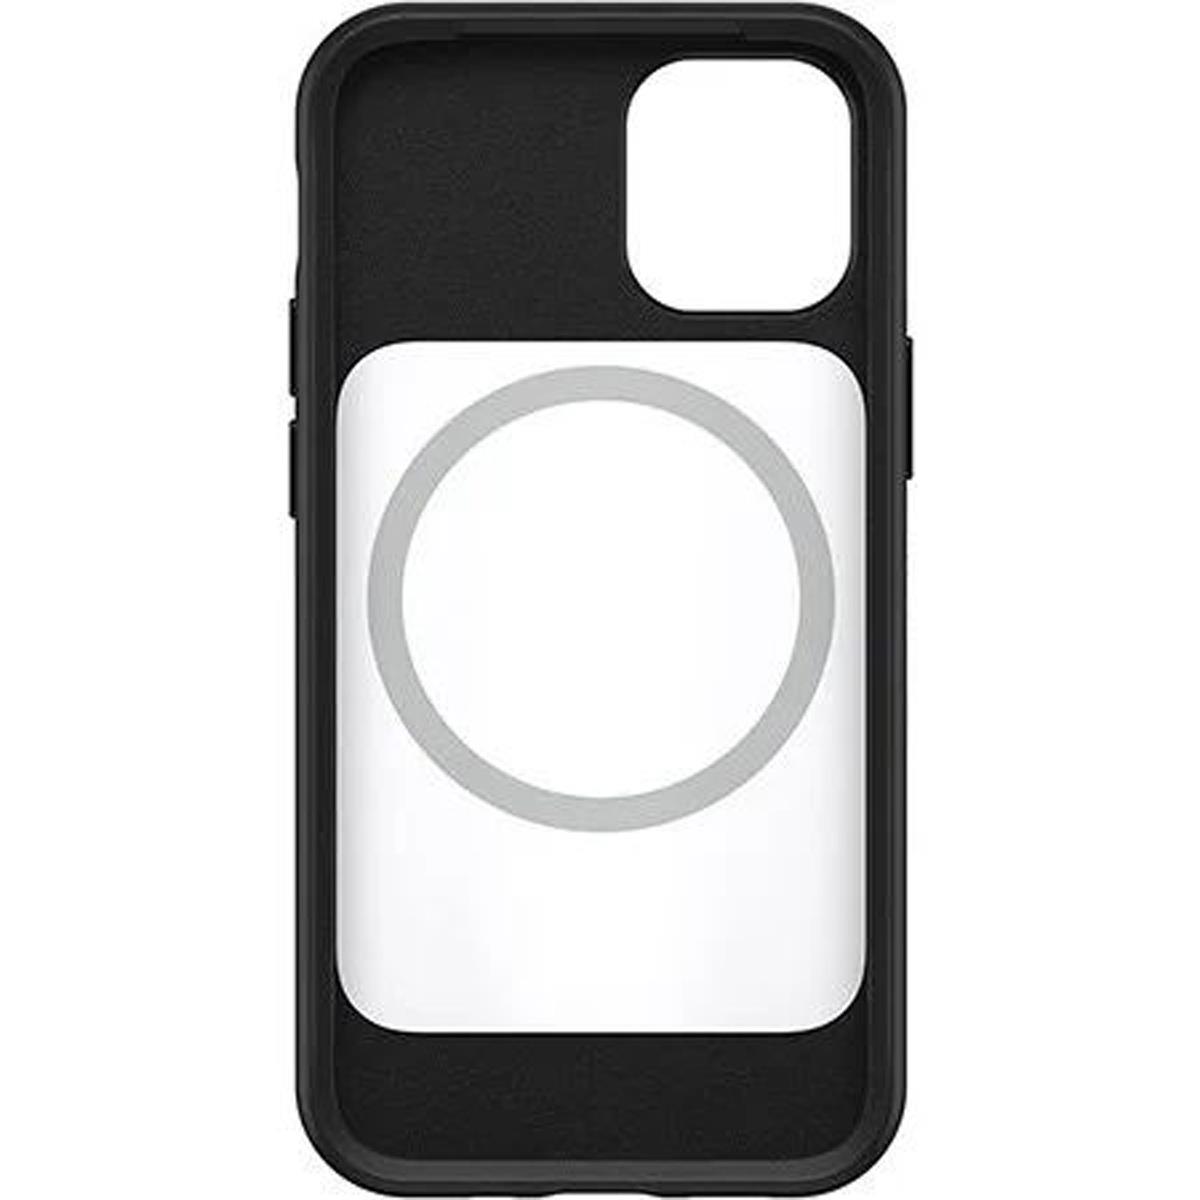 Photos - Case OtterBox Symmetry Series+ with MagSafe for Apple iPhone 12 mini, Black 77 